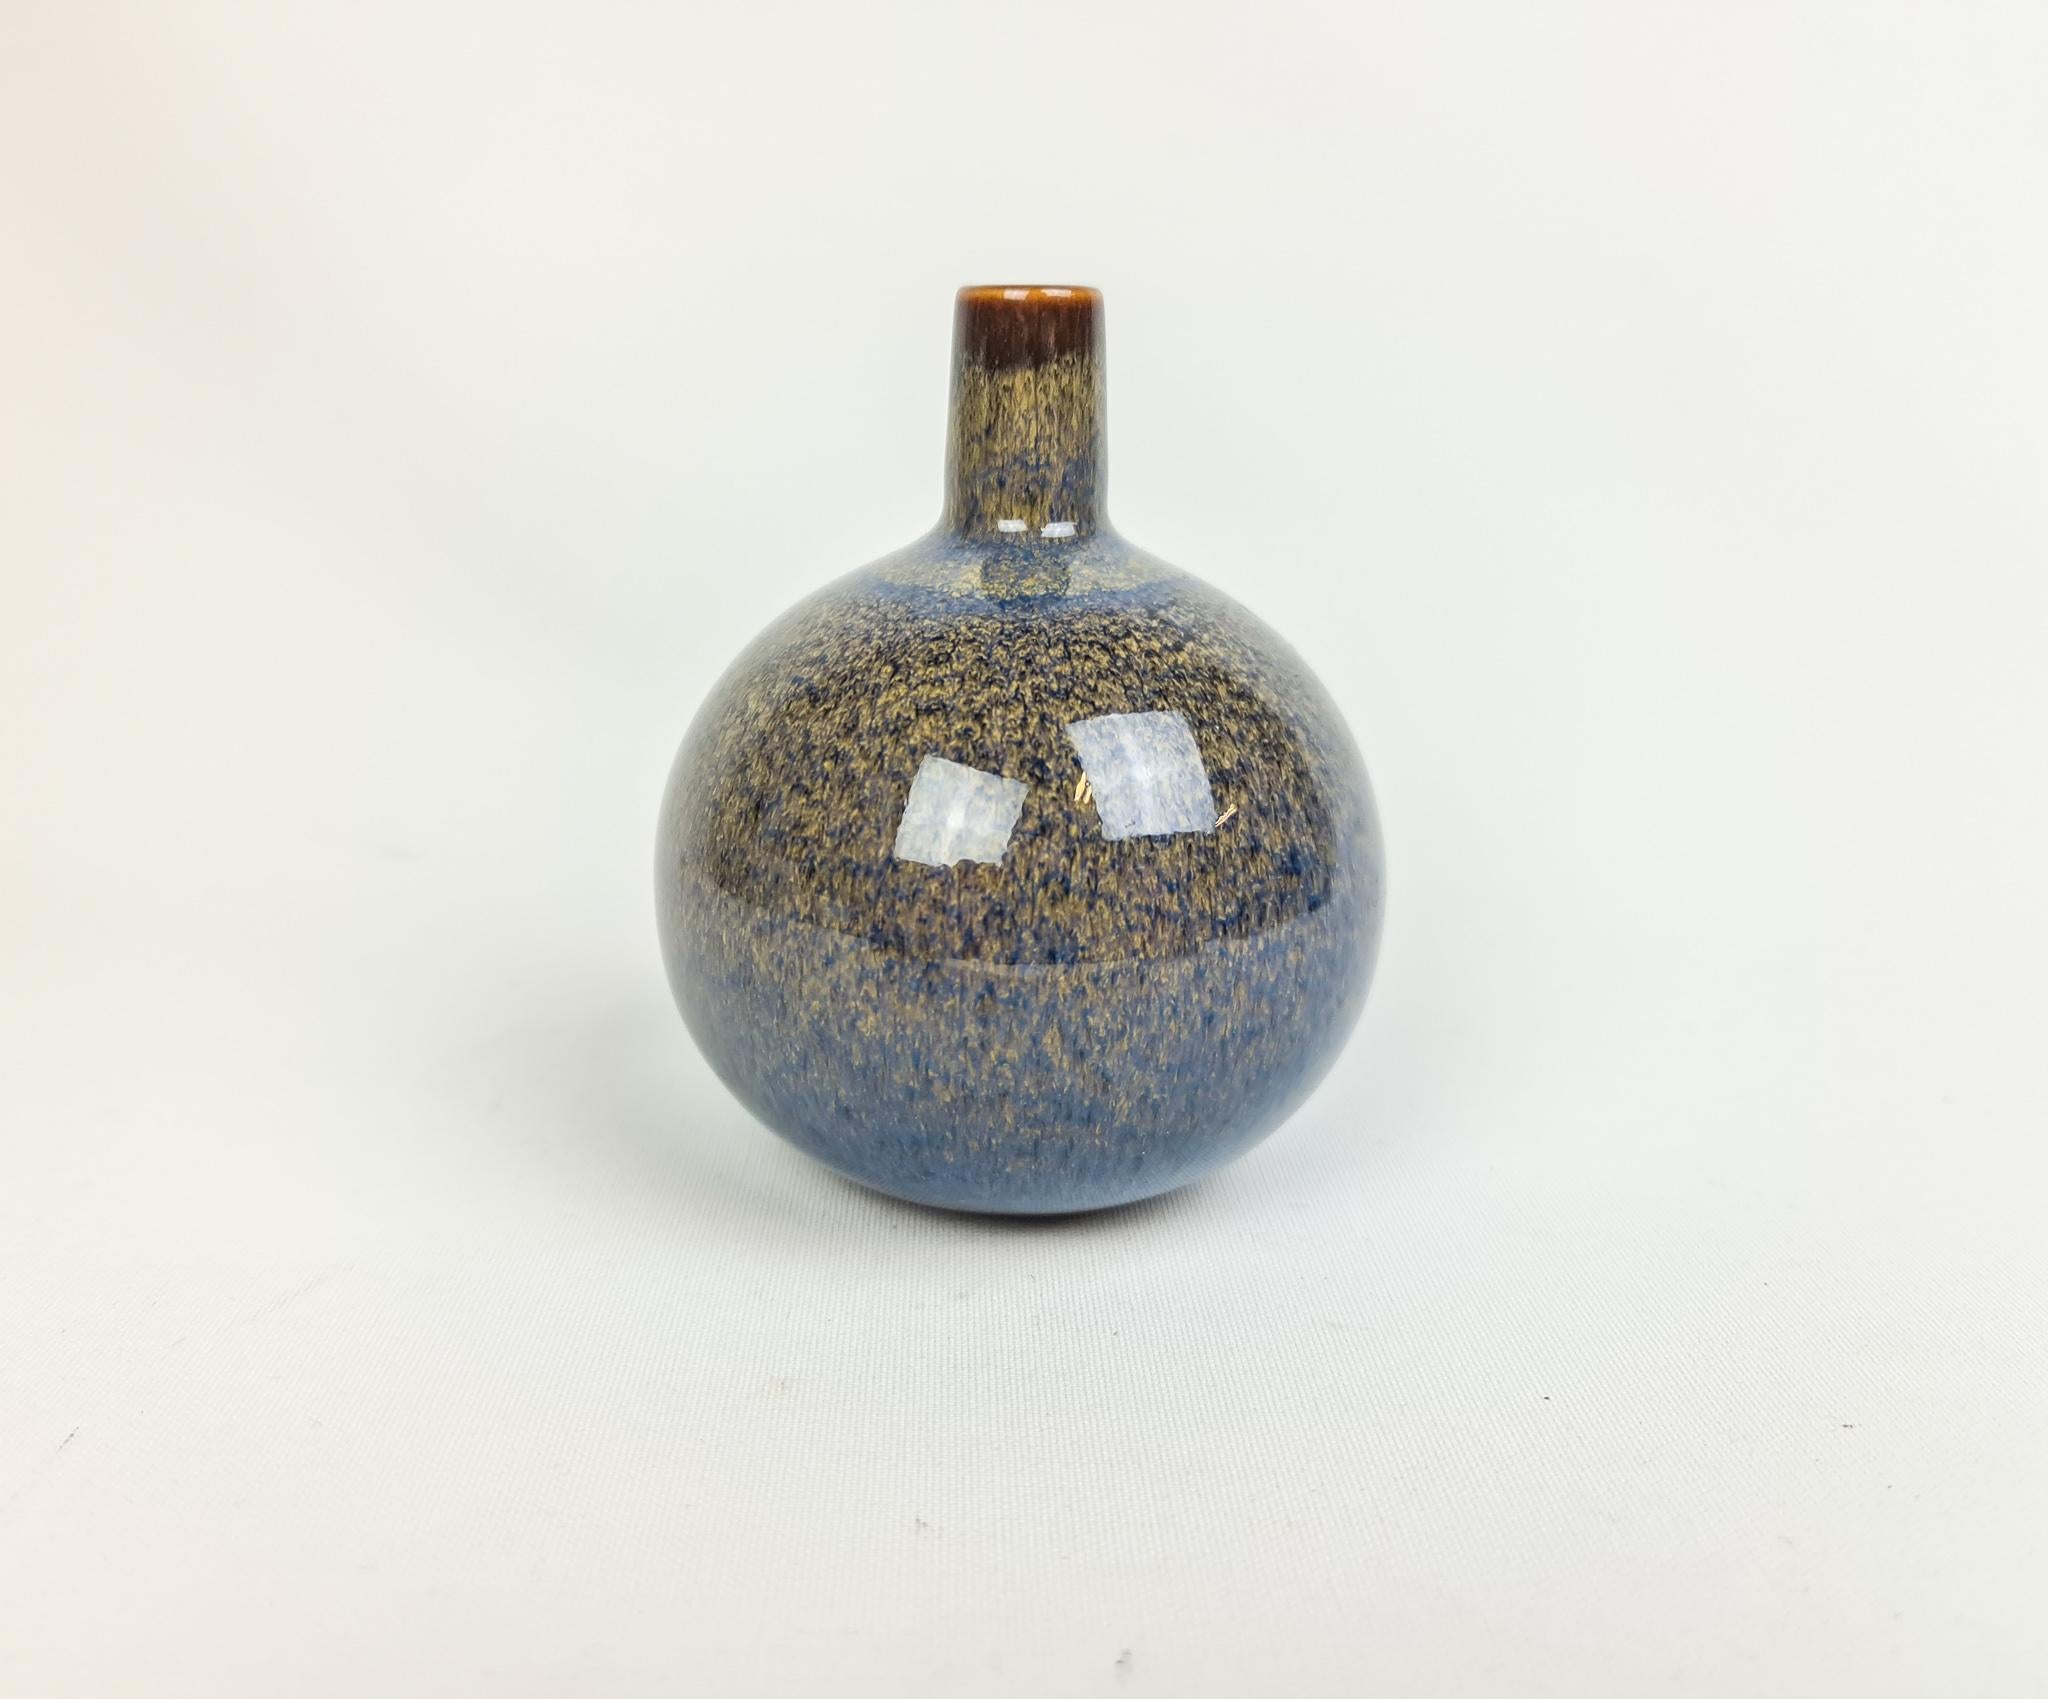 Wonderful vase made in Sweden 1950s at Rörstrand and designed by Carl-Harry Stålhane.
The vase has beautiful Rounded bottom with a small top, the lines and a glaze are something special on this small vase.

Very good condition. 

Measures: H 12